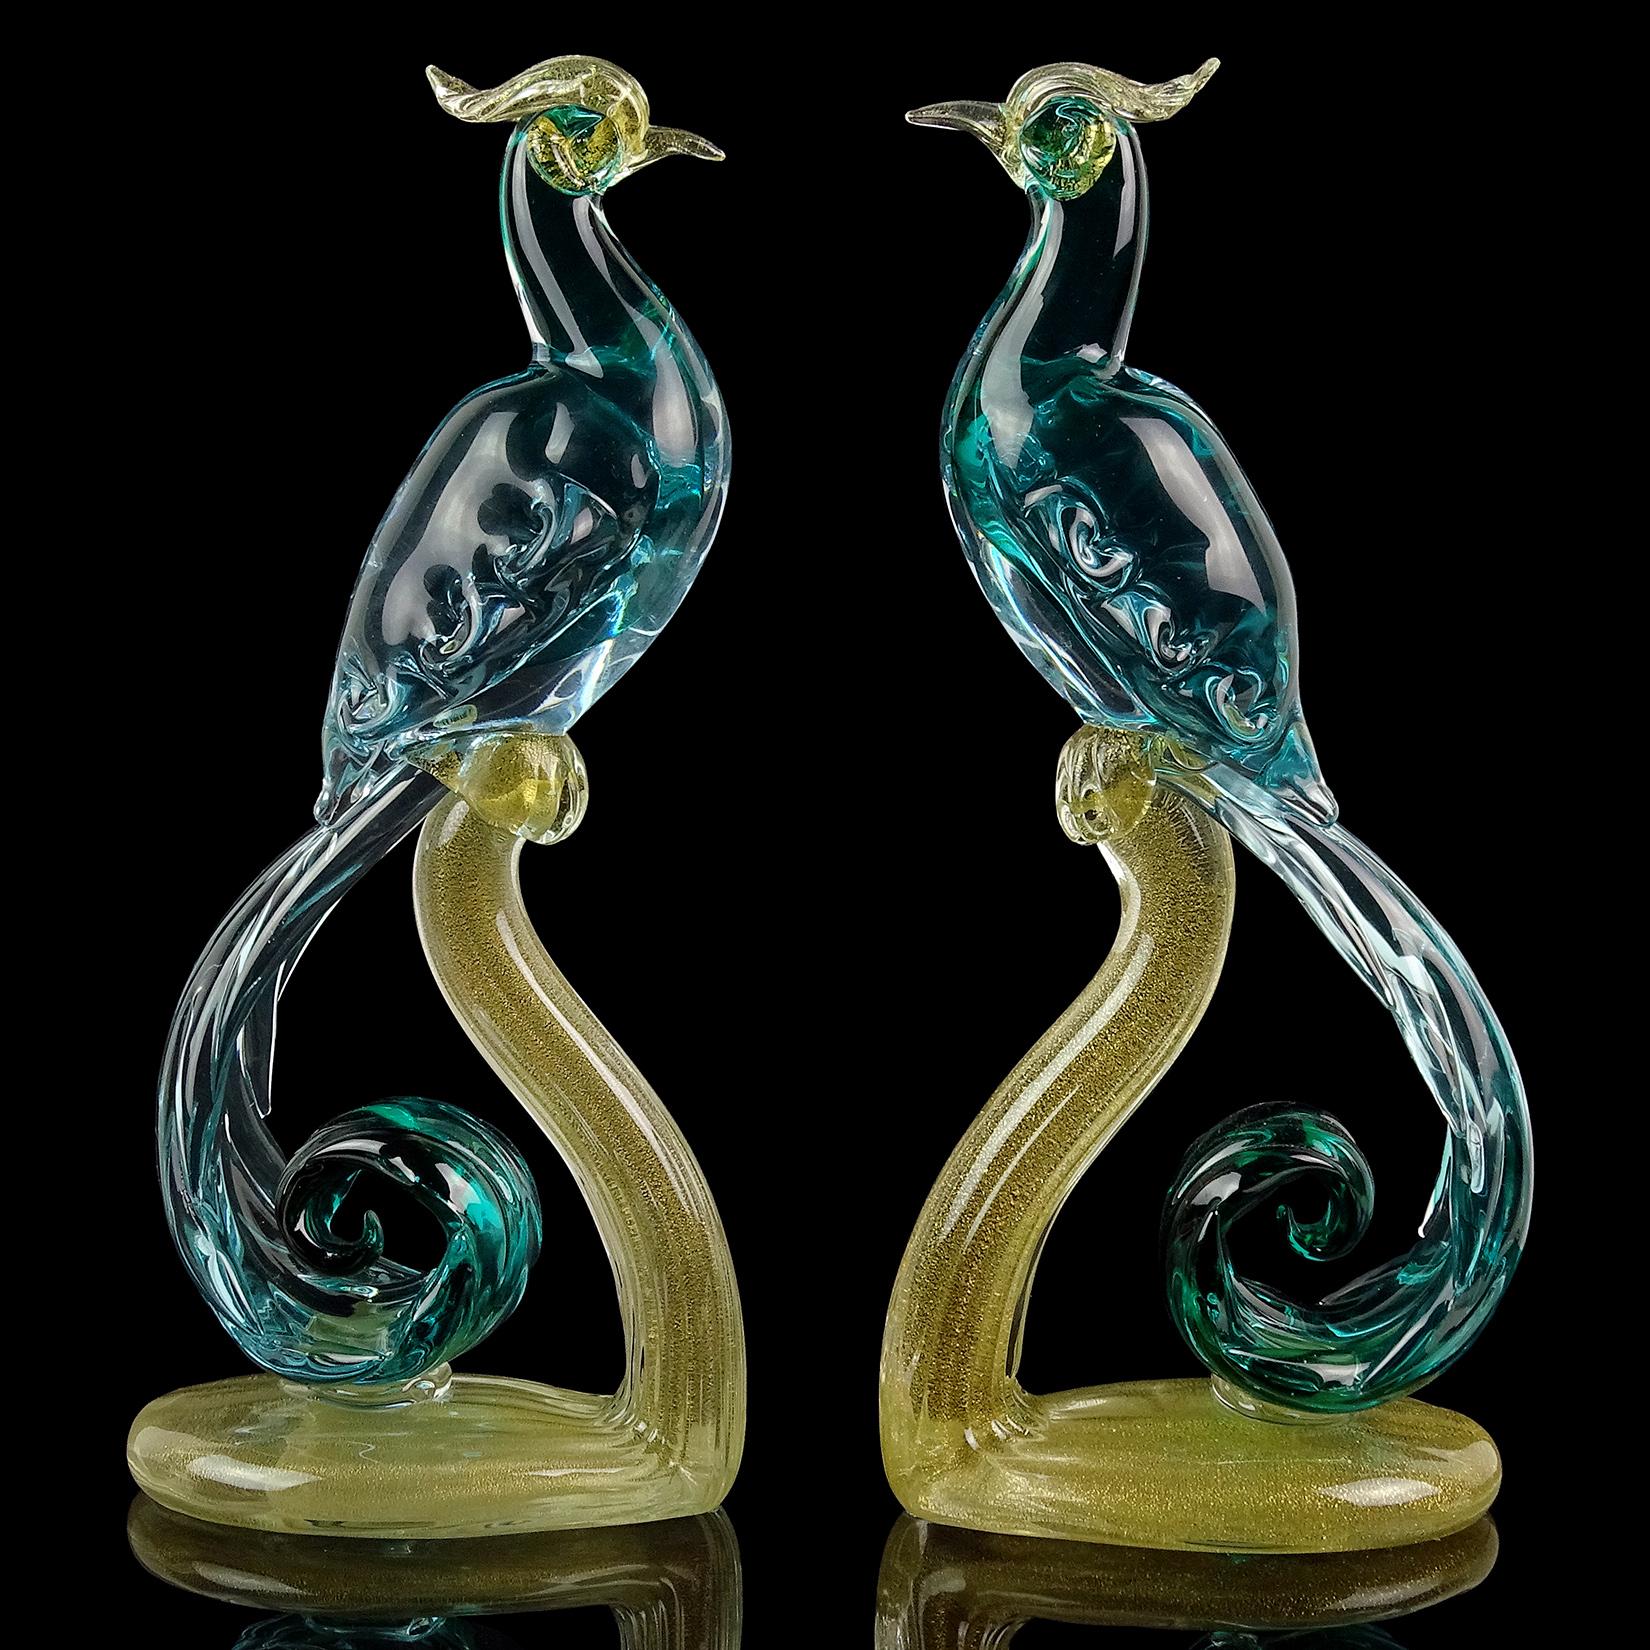 Gorgeous pair of vintage Murano hand blown Sommerso green to aqua gold flecks Italian art glass pheasants / birds sculptures. Documented to designer Alfredo Barbini. Published in his catalog. The pair is beautifully sculpted and profusely filled